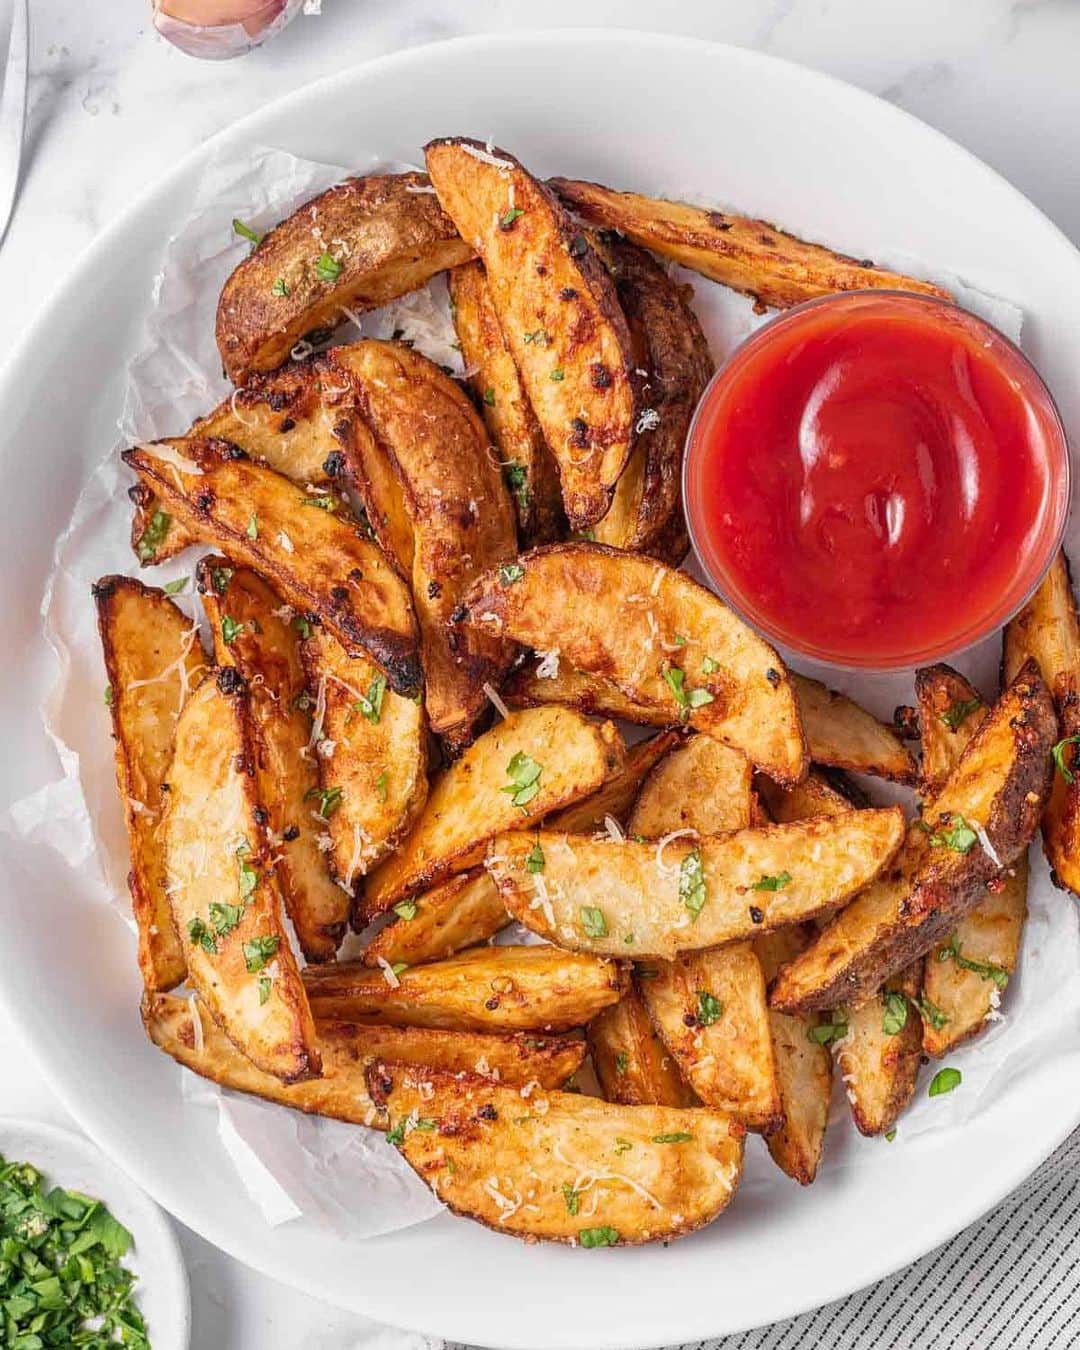 Easy Recipesのインスタグラム：「Air fryer potato wedges are incredibly crispy and seasoned to perfection. Potatoes are tossed with garlic, parmesan cheese and then air fried until golden and crisp. Can be paired with almost any meal.  Full recipe link in my bio @cookinwithmima  https://www.cookinwithmima.com/air-fryer-potato-wedges/」